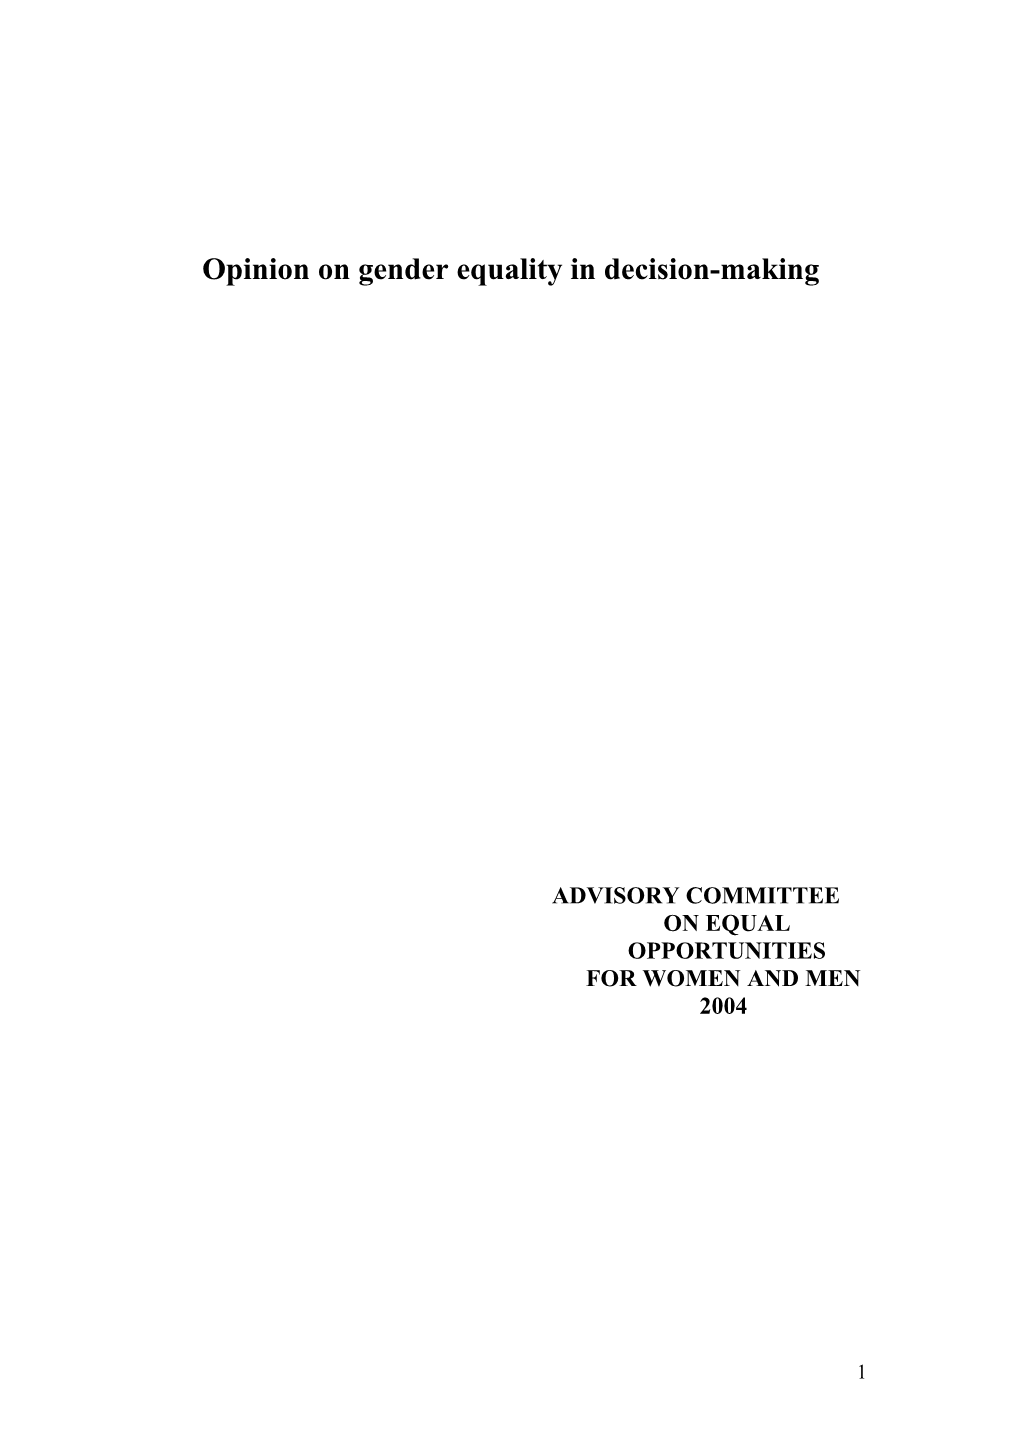 Gender Equality in Decision-Making